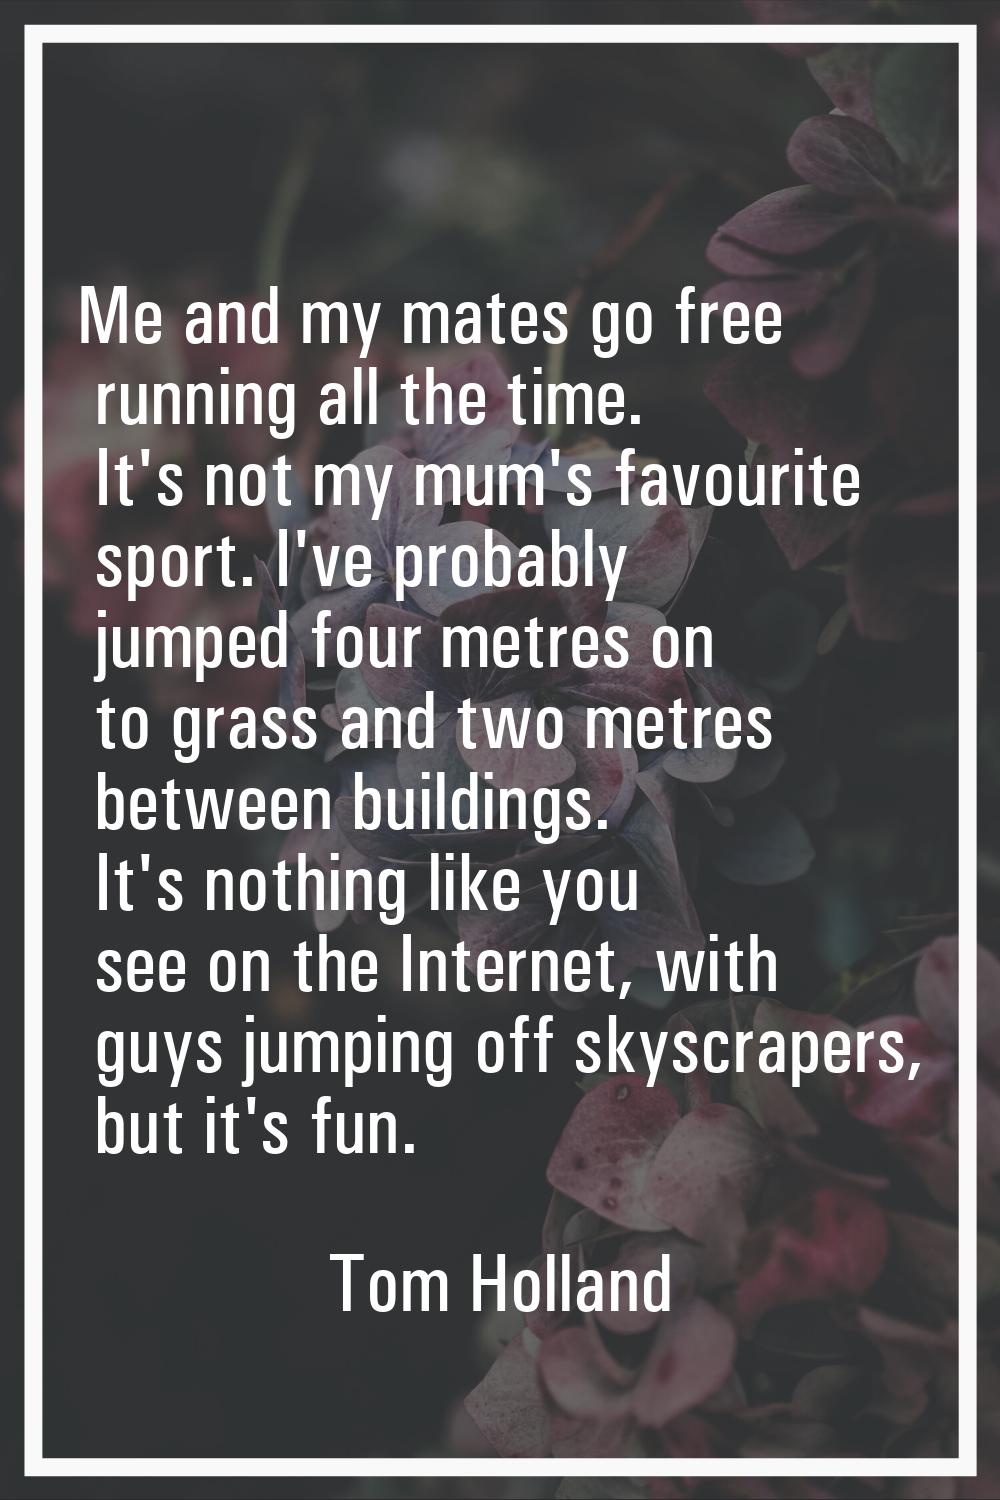 Me and my mates go free running all the time. It's not my mum's favourite sport. I've probably jump